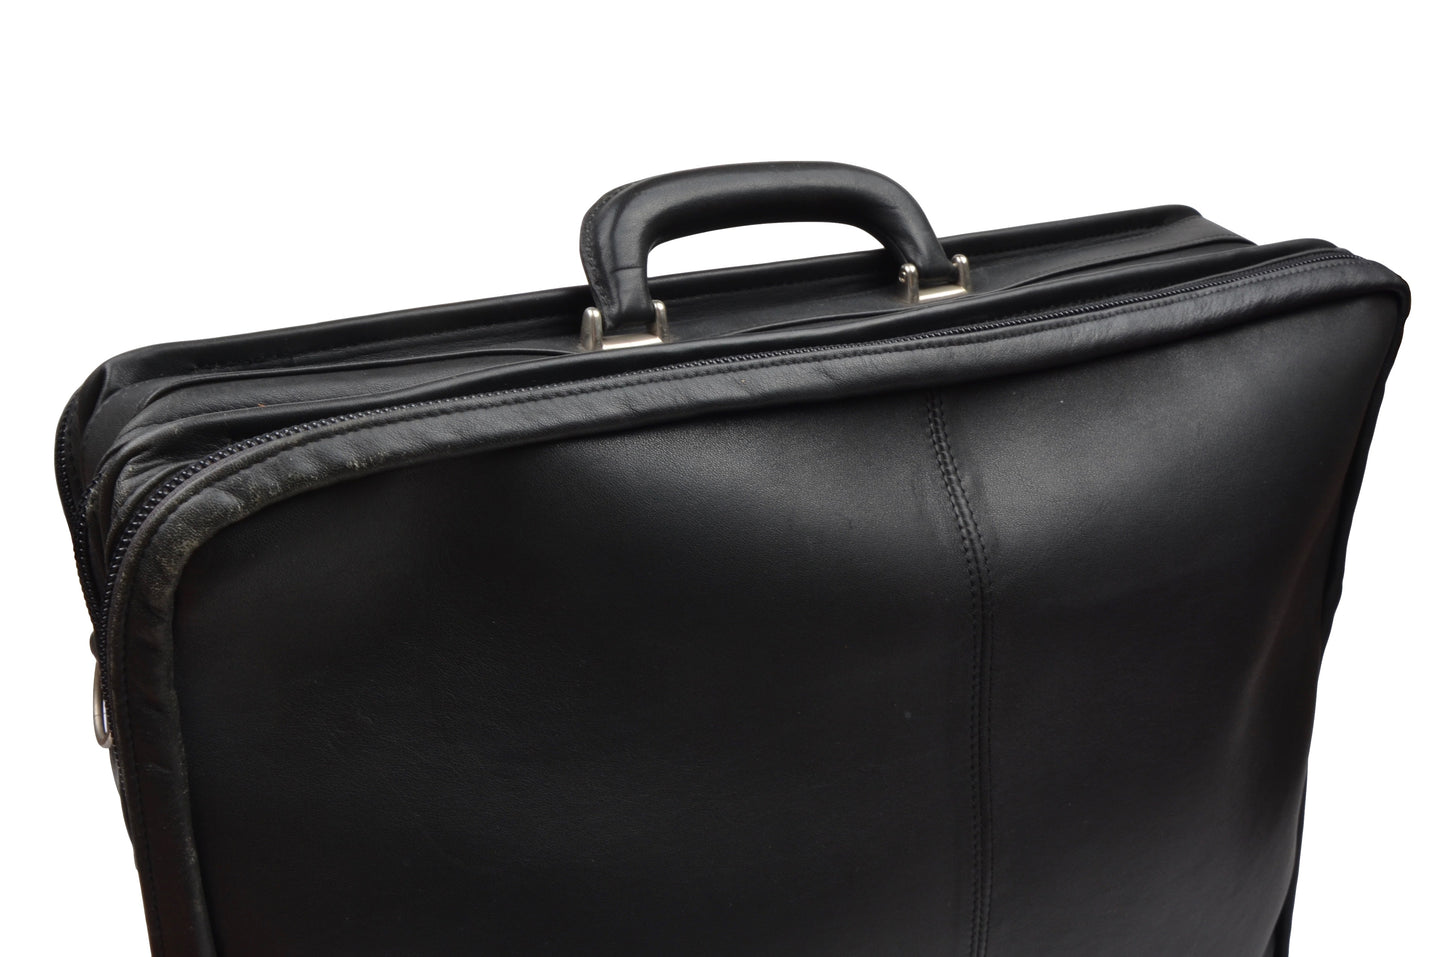 Offermann Flyer Leather Carry-On Business Suitcase - Black